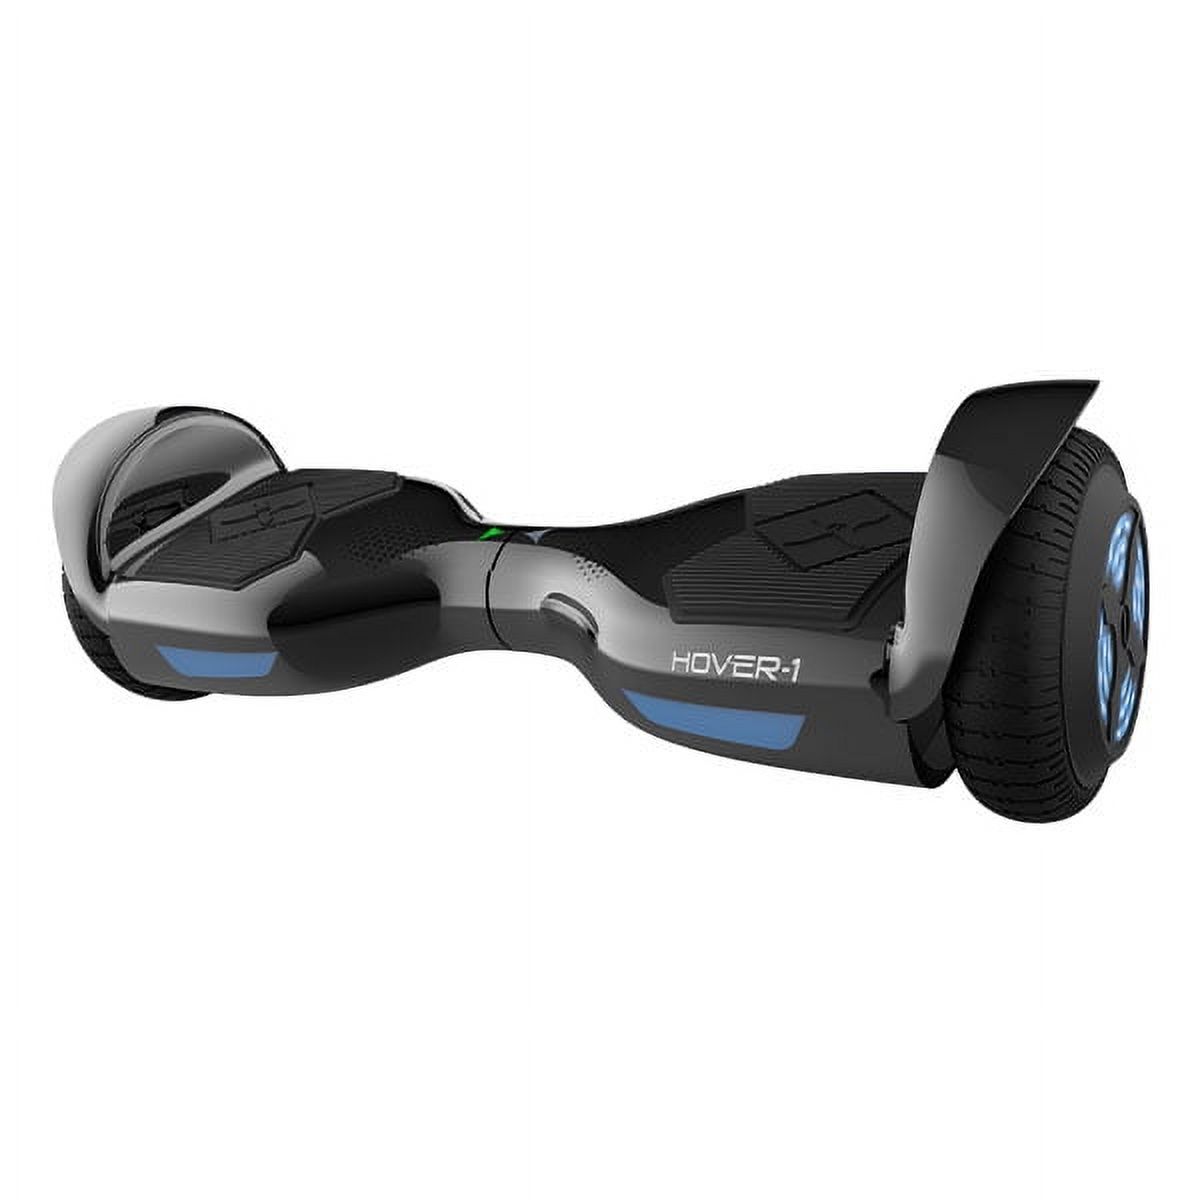 Hover-1 Helix UL Certified Electric Hoverboard, 6.5in LED Wheels, Bluetooth Speaker, Gunmetal Gray - image 1 of 8